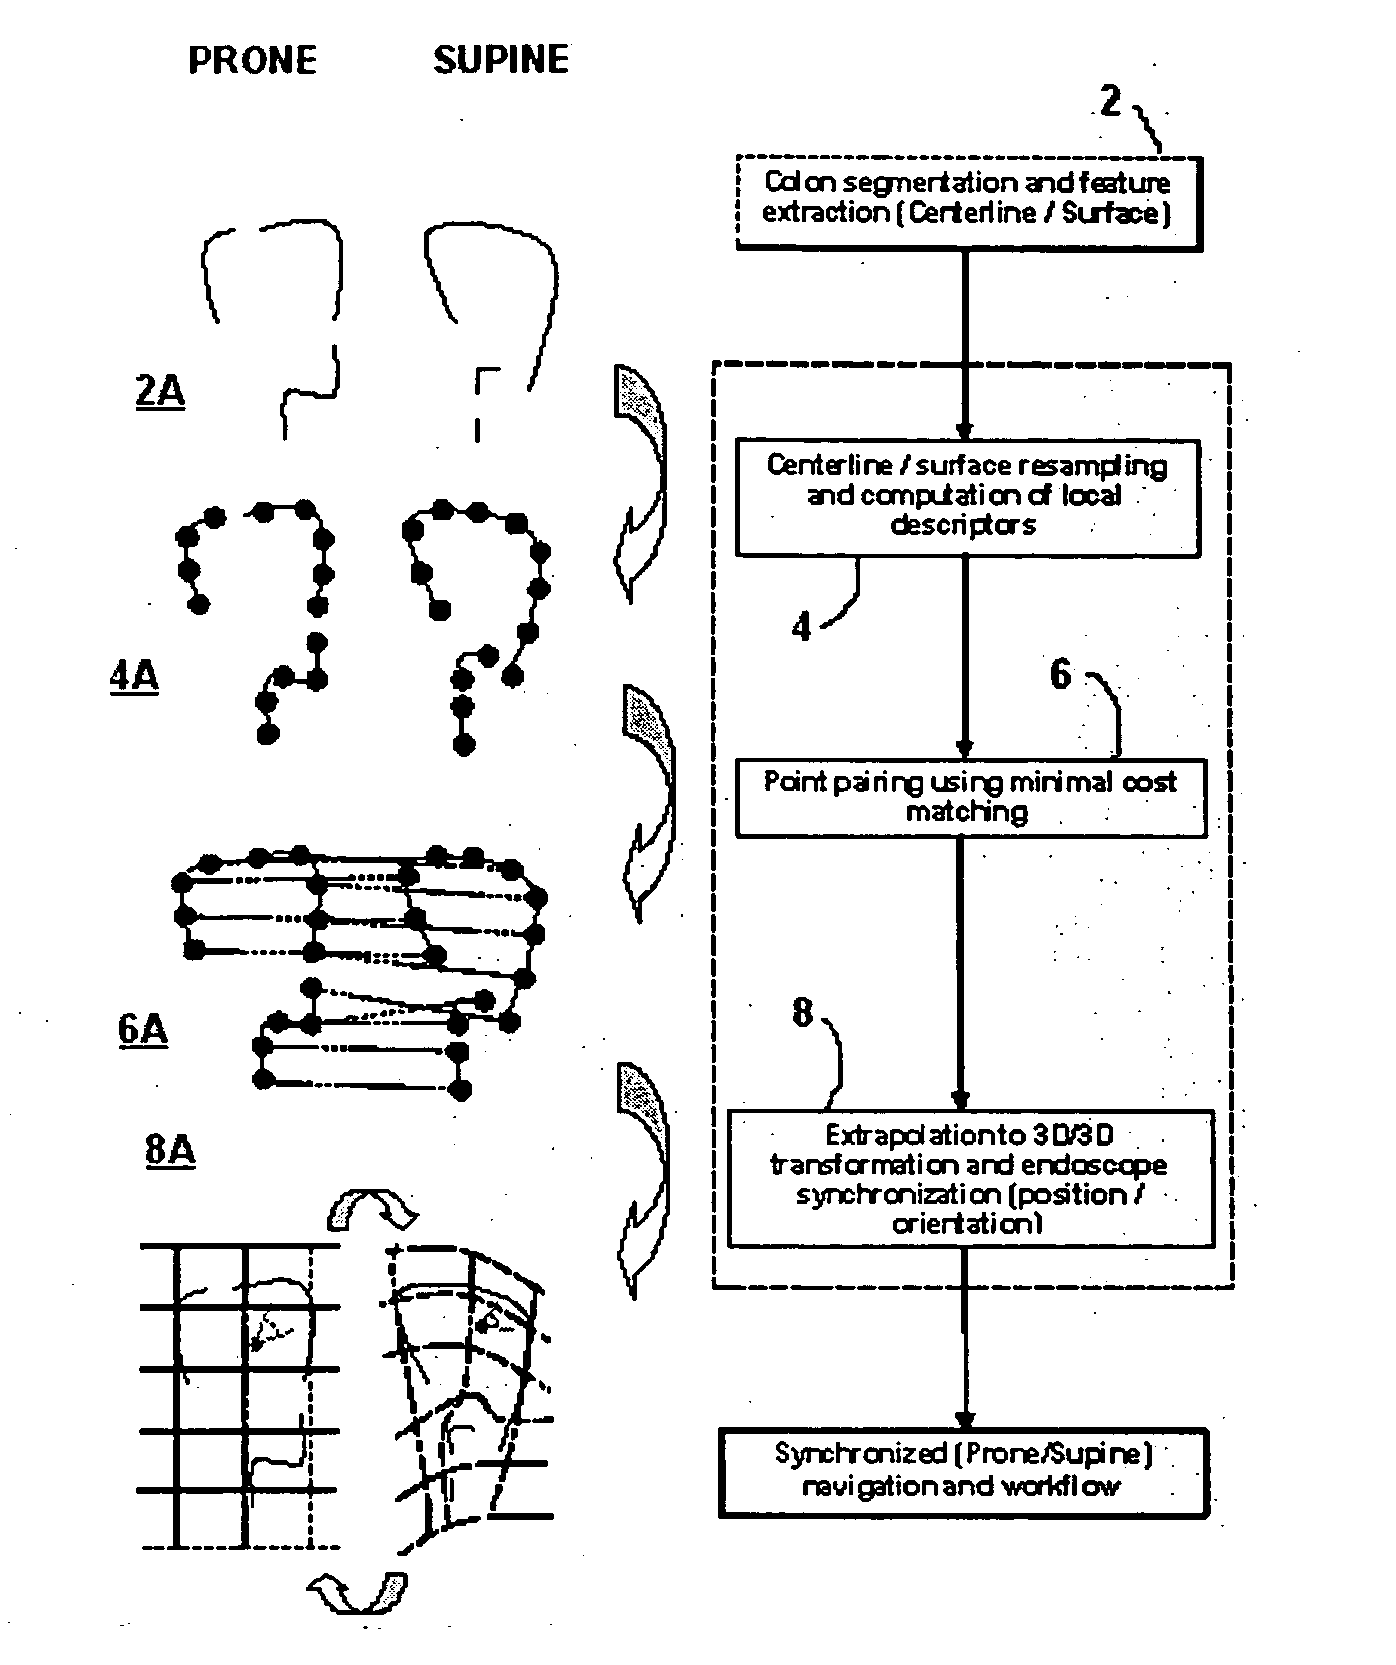 Method and apparatus for registration of virtual endoscopic images